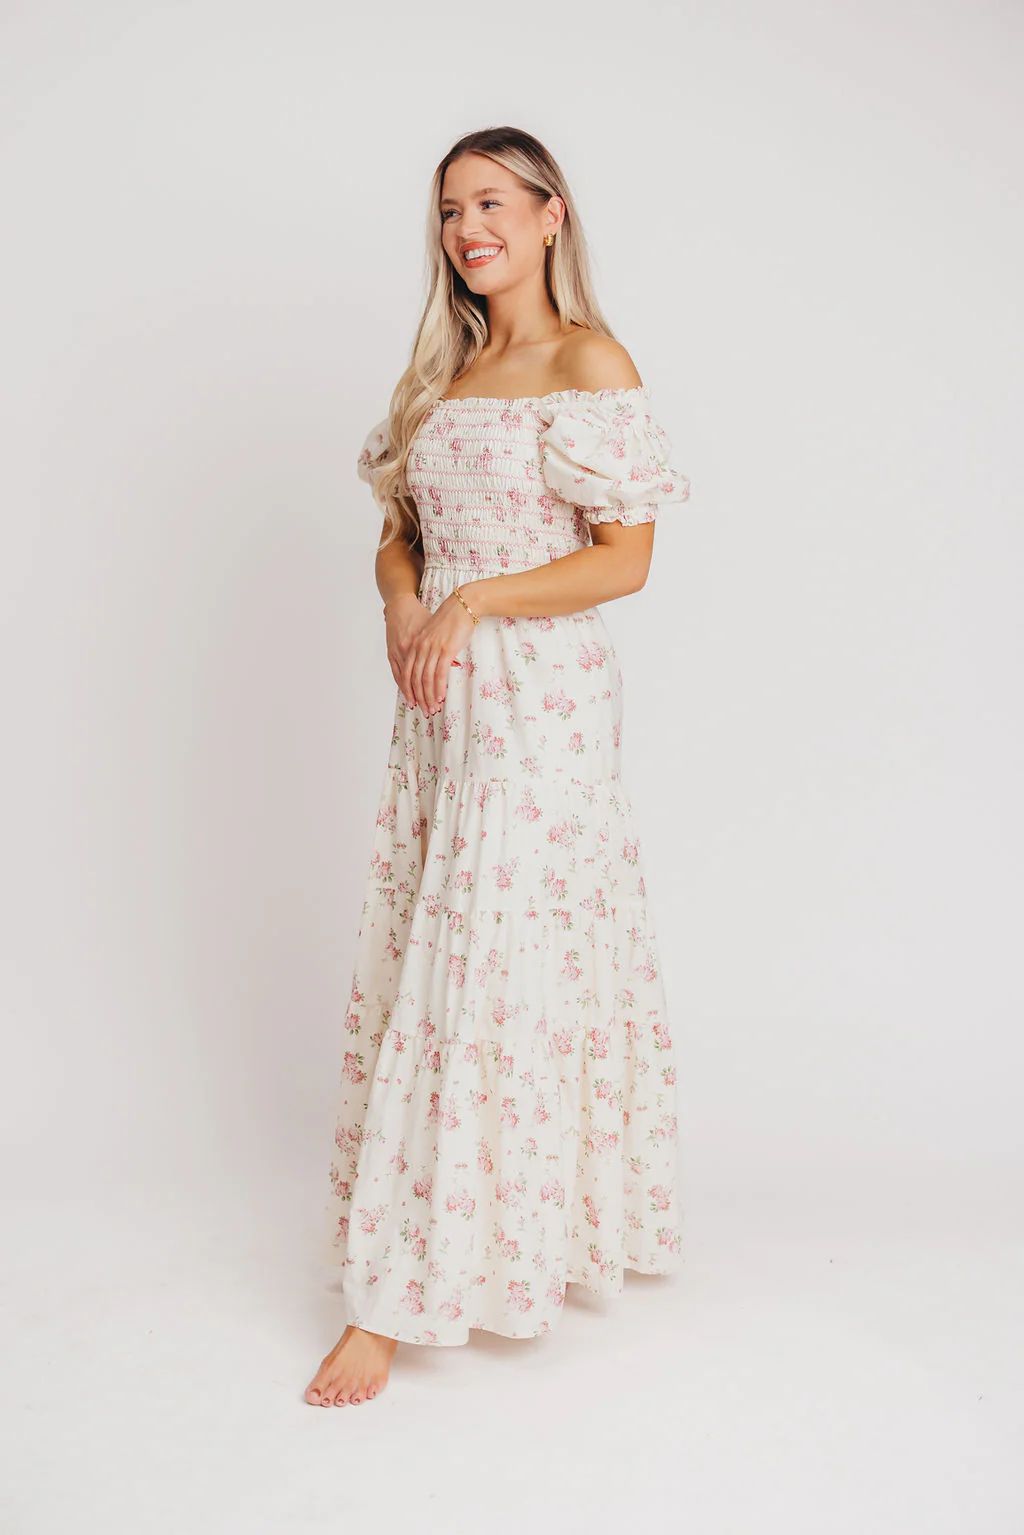 Harper Worth Maxi Dress in Ivory/Pink Floral - Inclusive Sizing (S-3XL | Worth Collective